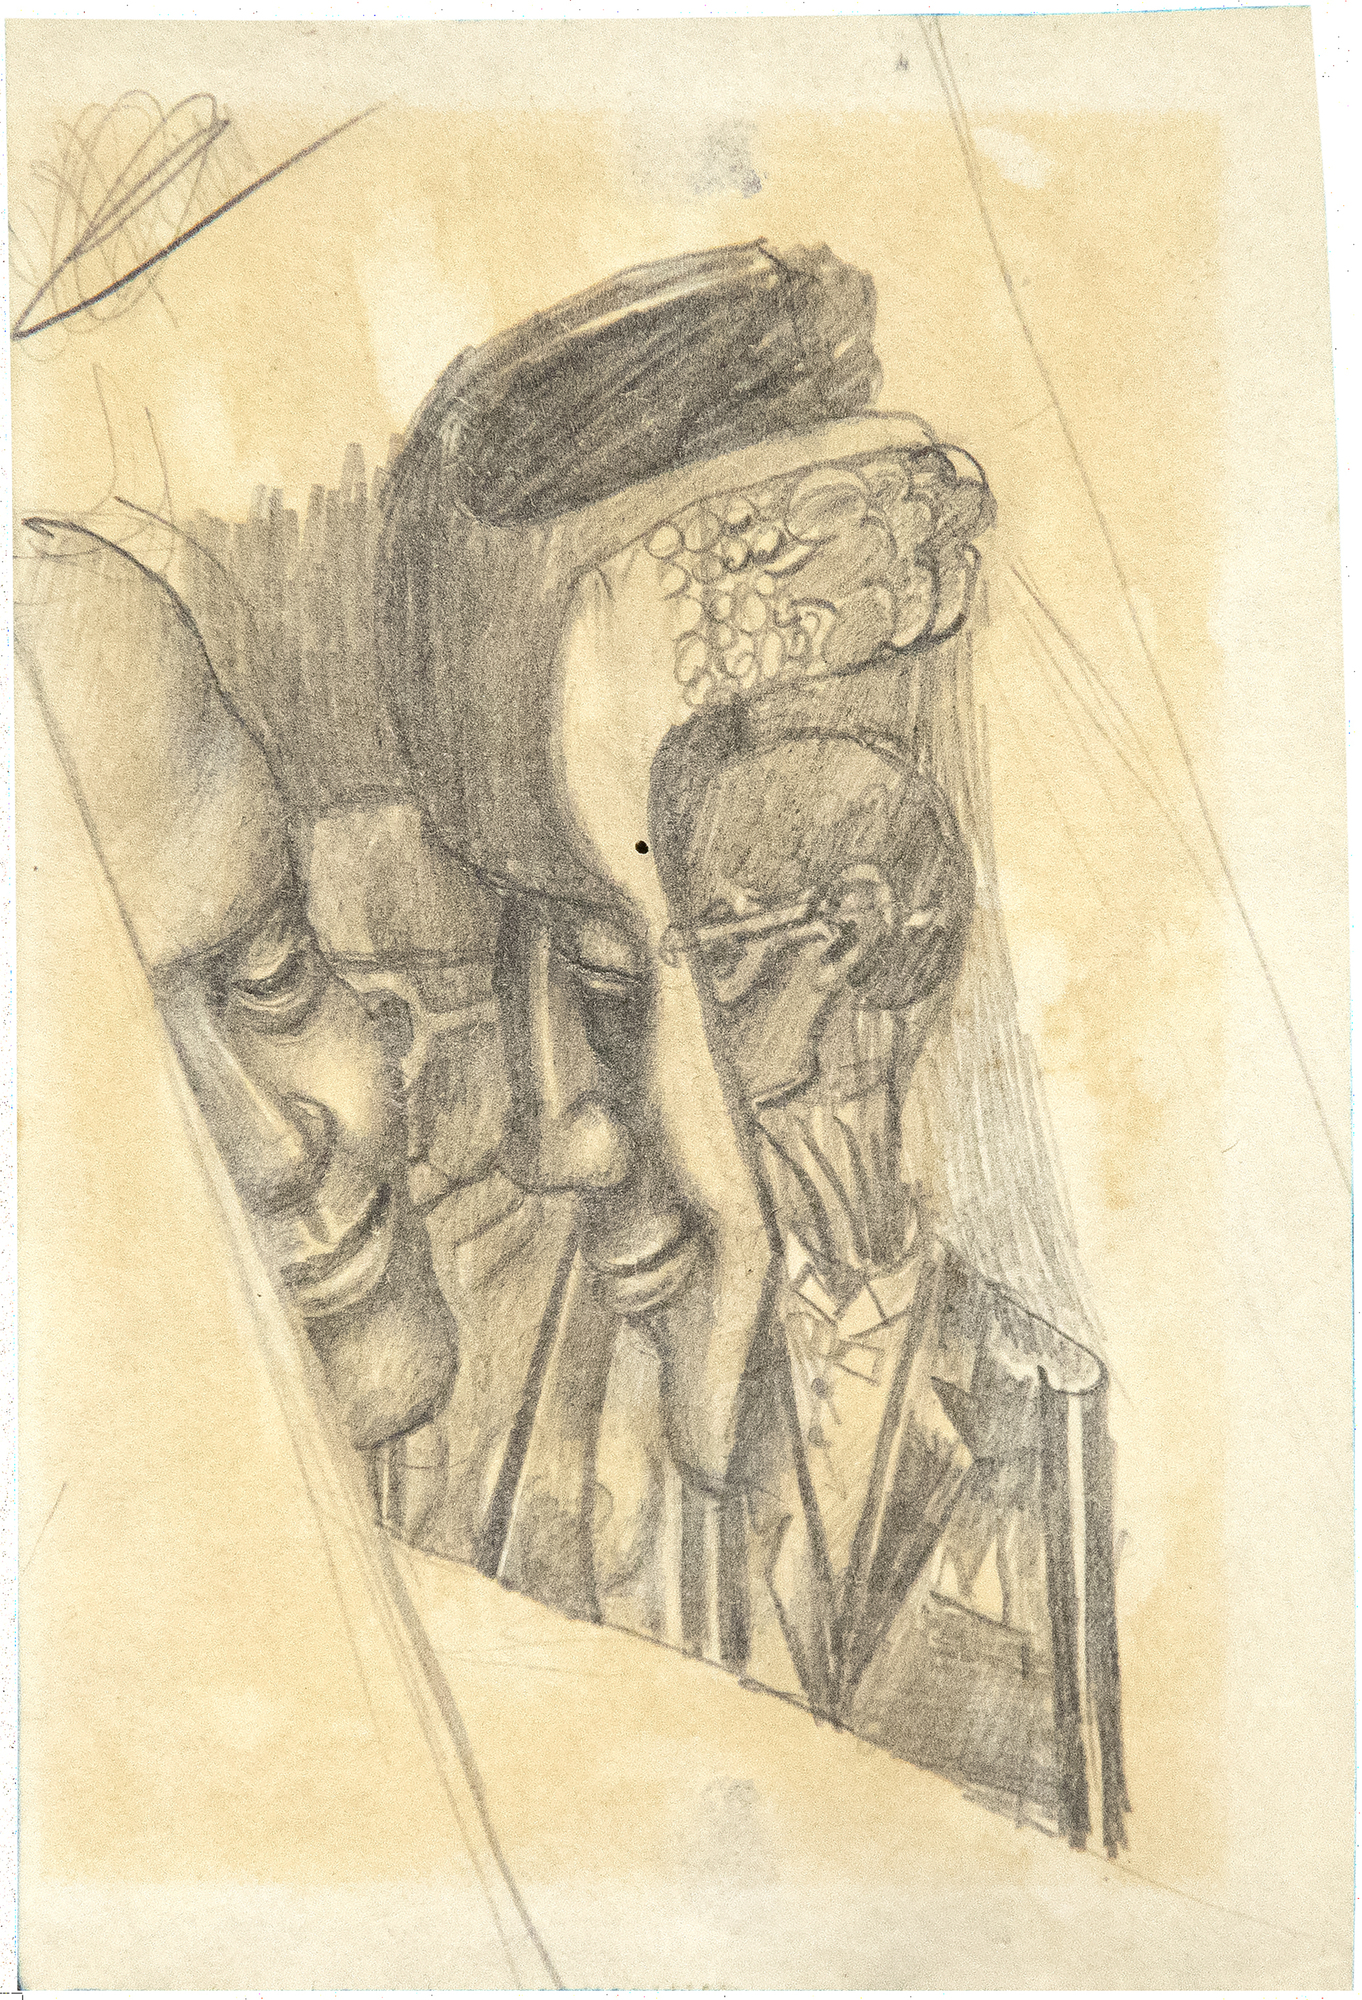 IRVING NORMAN - Untitled (Possible Study for "From Work") - graphite on paper - 5 x 3 1/2 in.